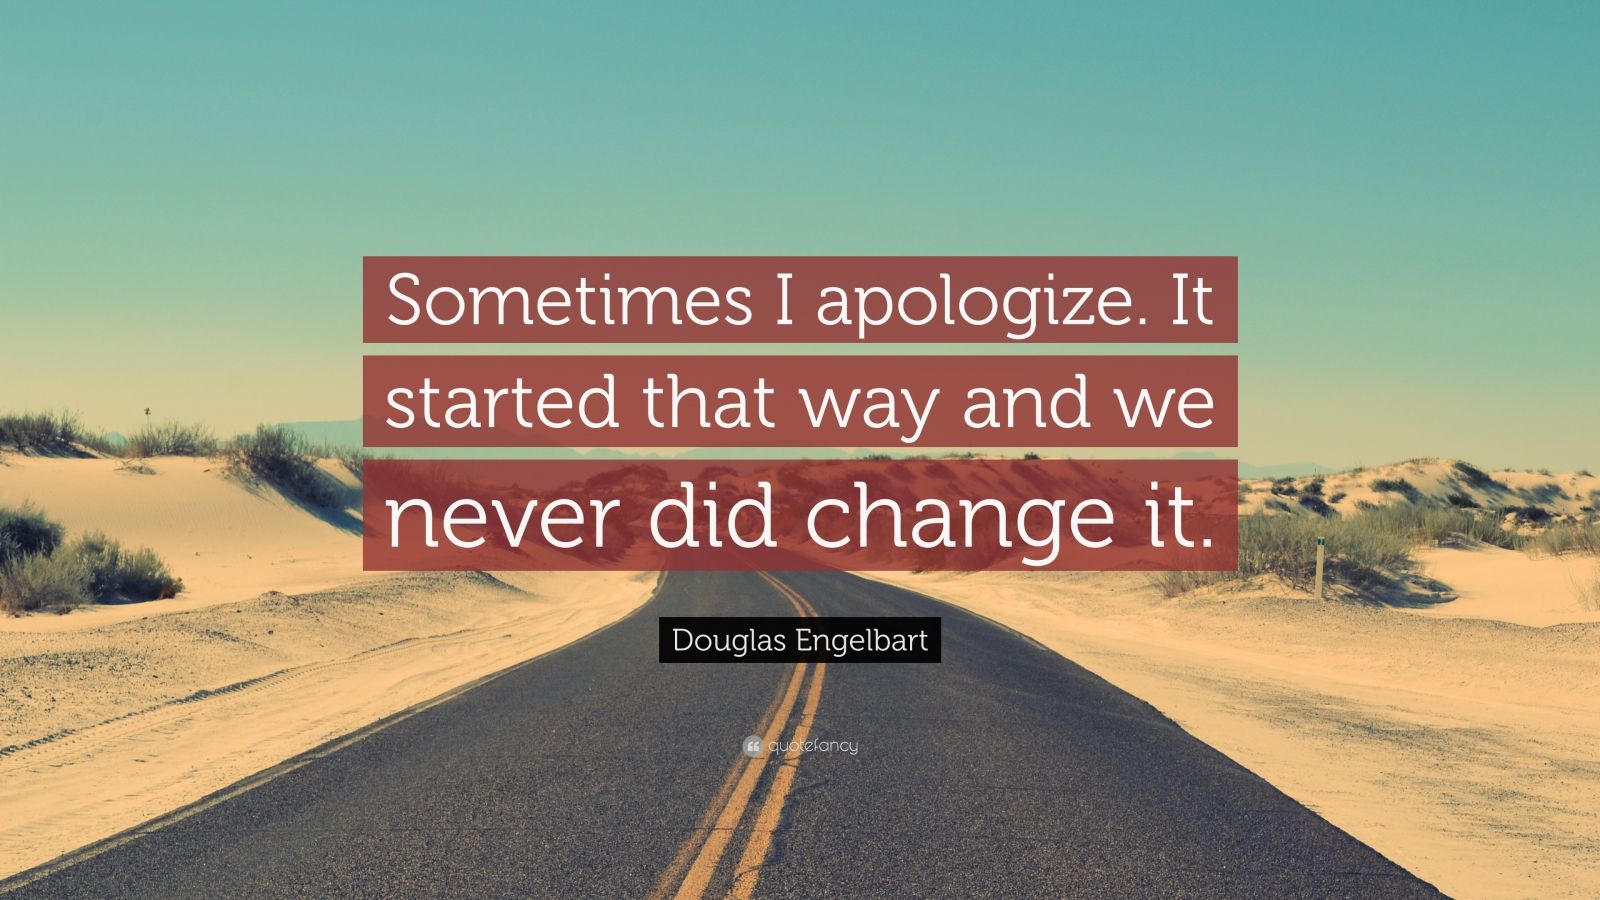 Douglas Engelbart Quote: “Sometimes I apologize. It started that way ...